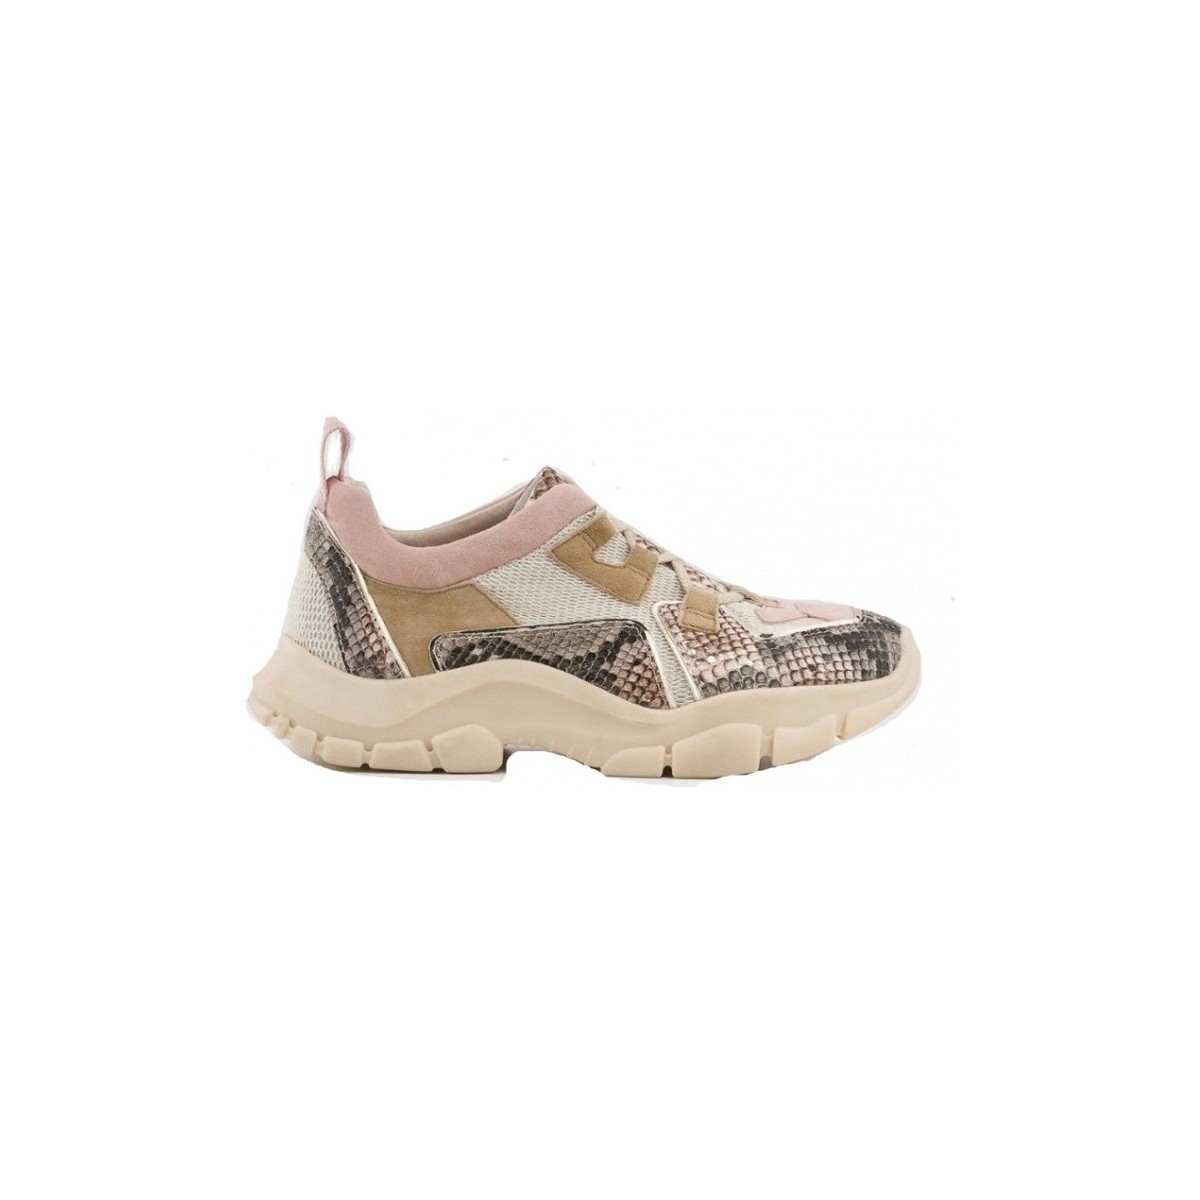 Chaussures Femme Anatomic & Co Basket umay Multicolore